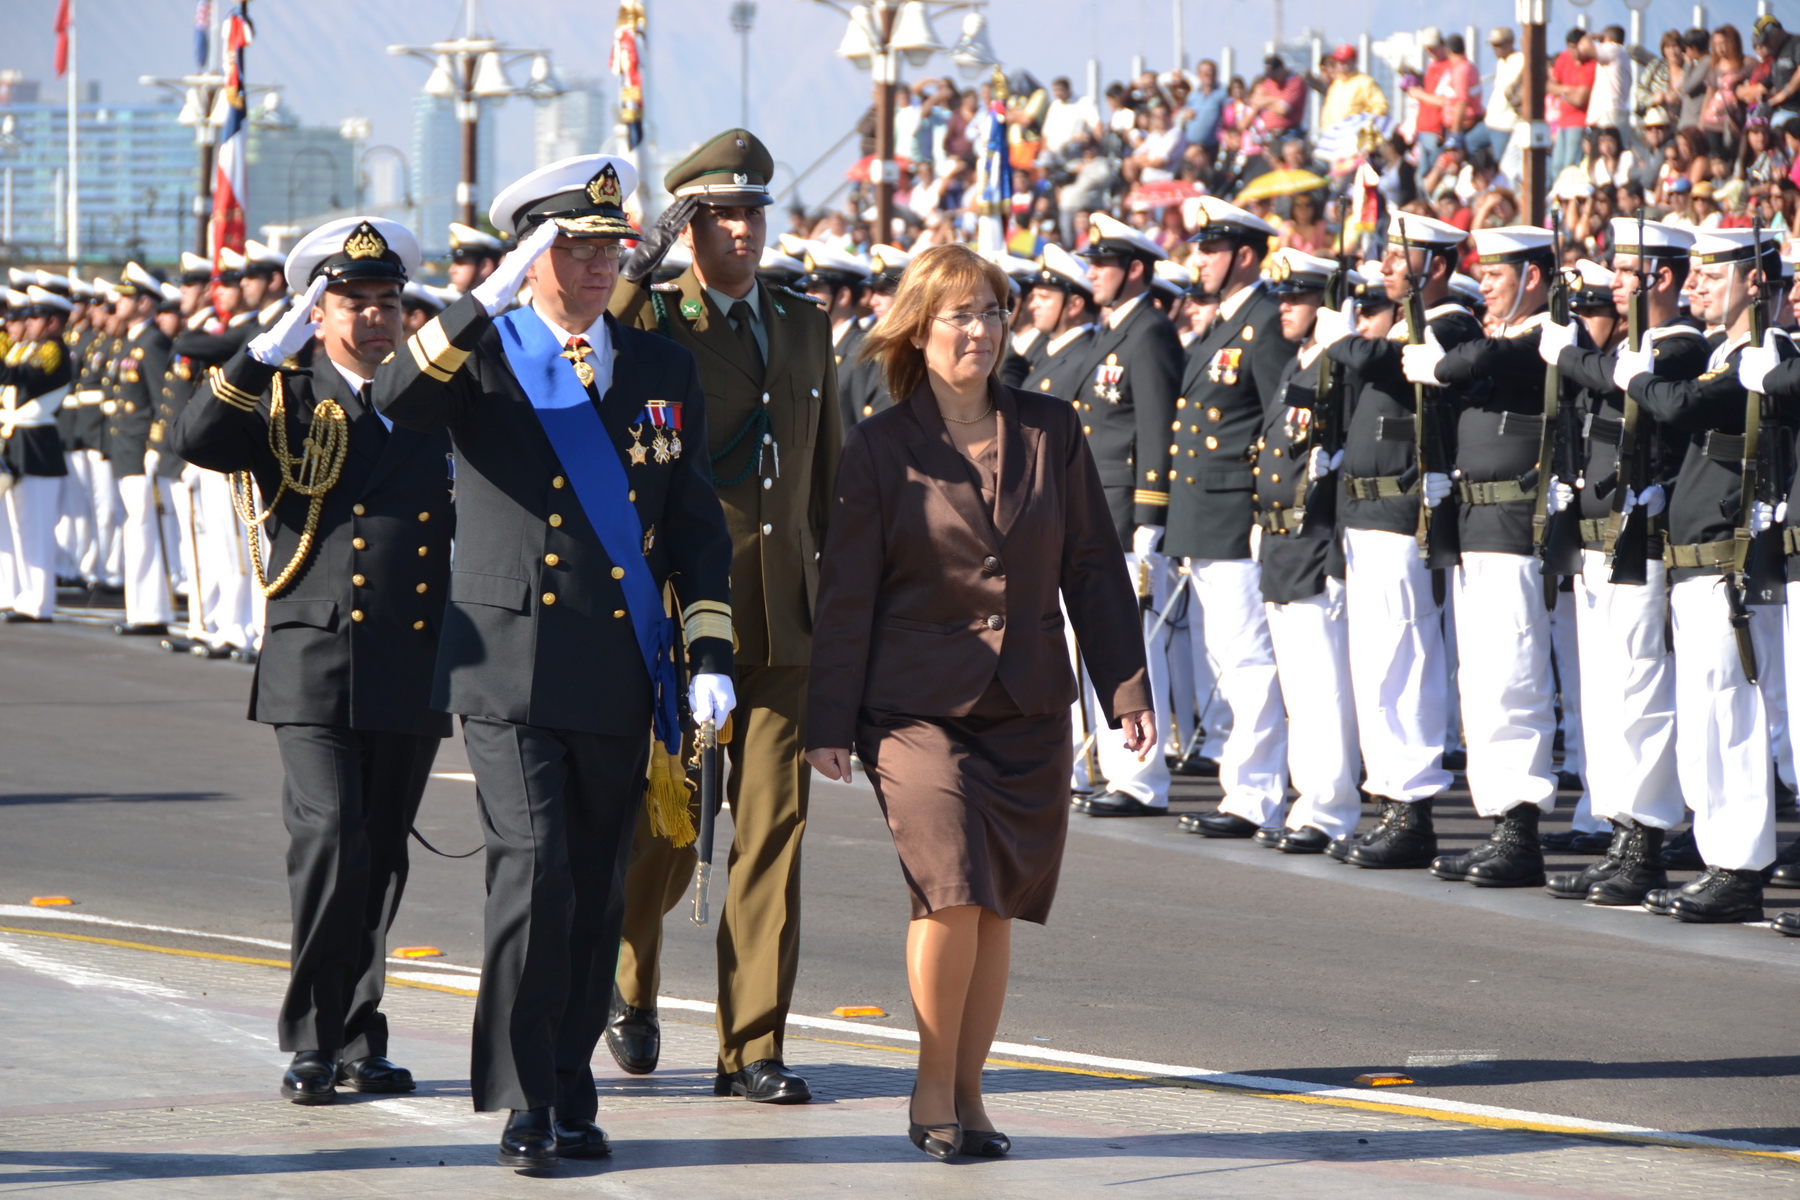 a man in uniform and a woman walking down the street next to a line of uniformed people